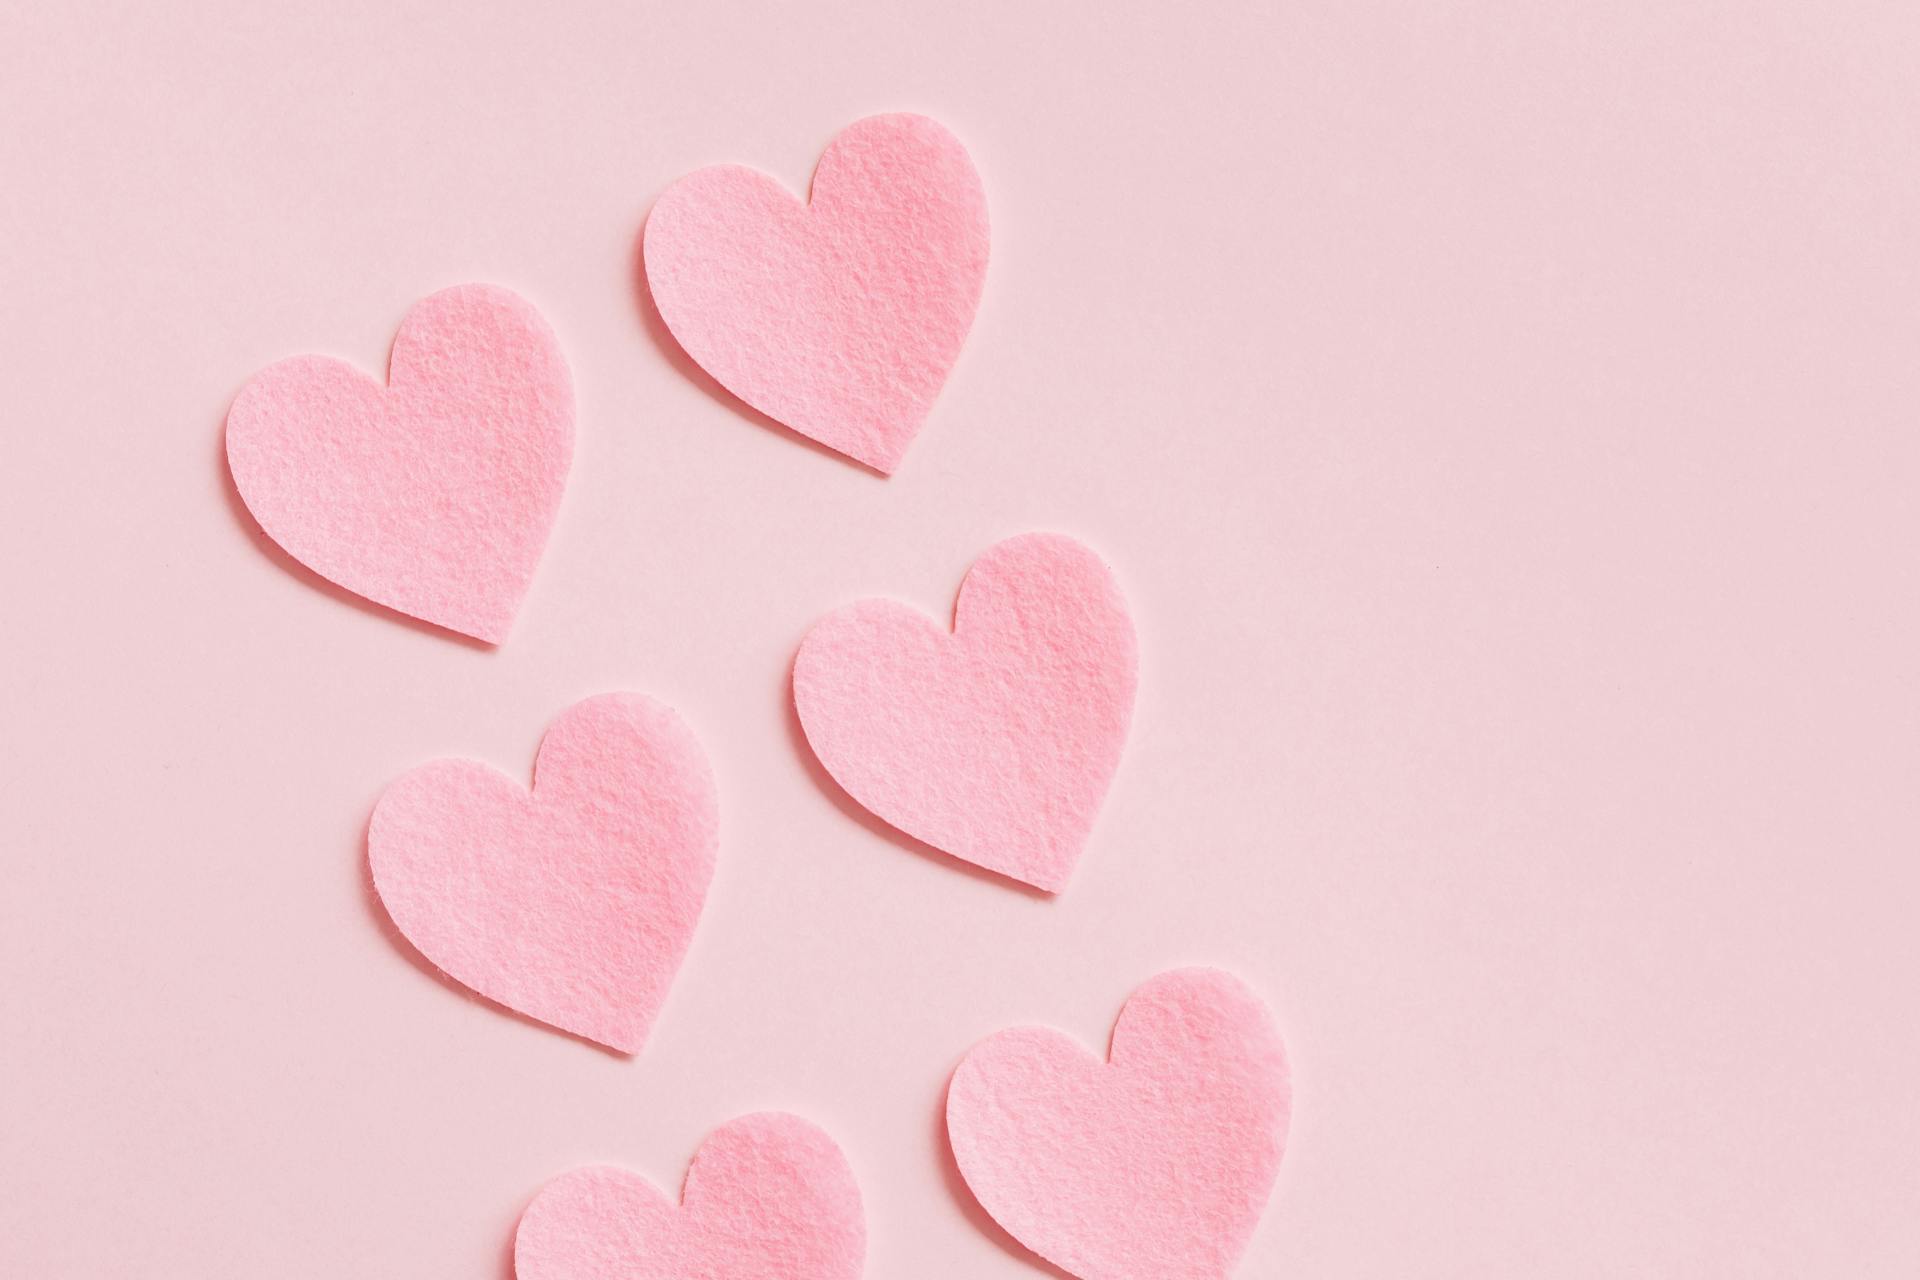 Heart Shaped Paper Cutouts On Pink Background